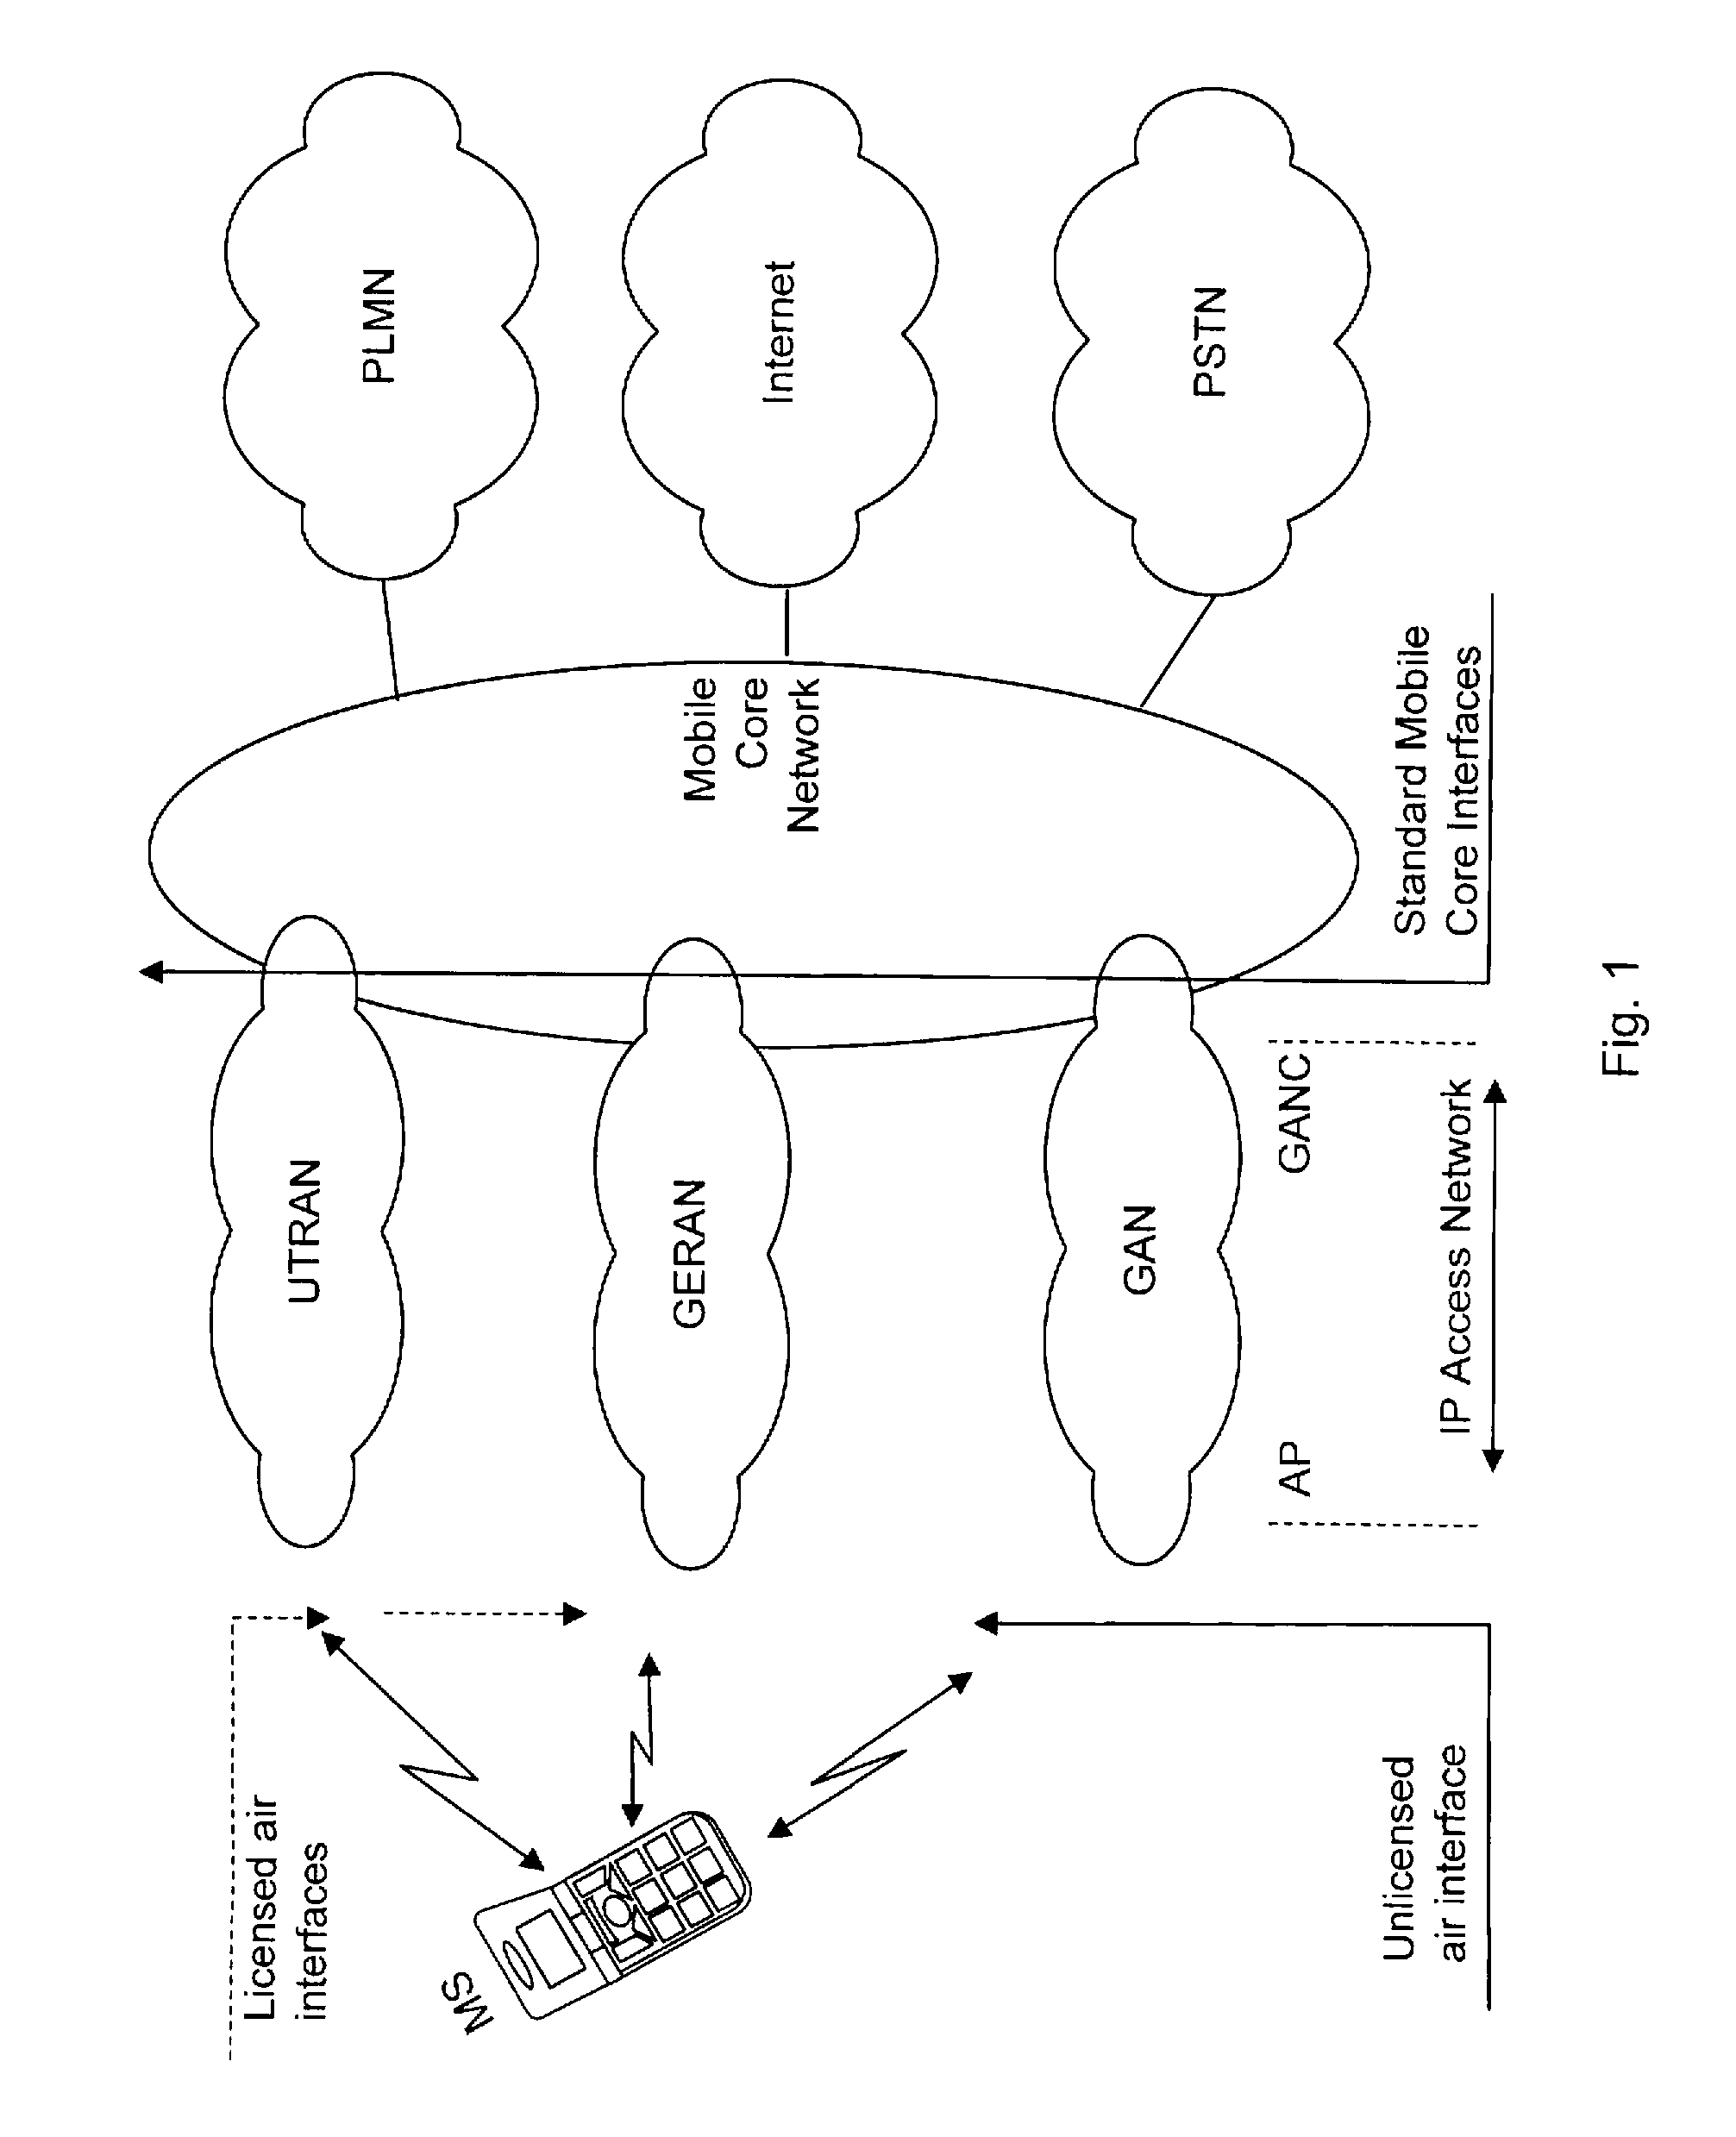 Methods for Reducing Paging Load in Generic Access Networks